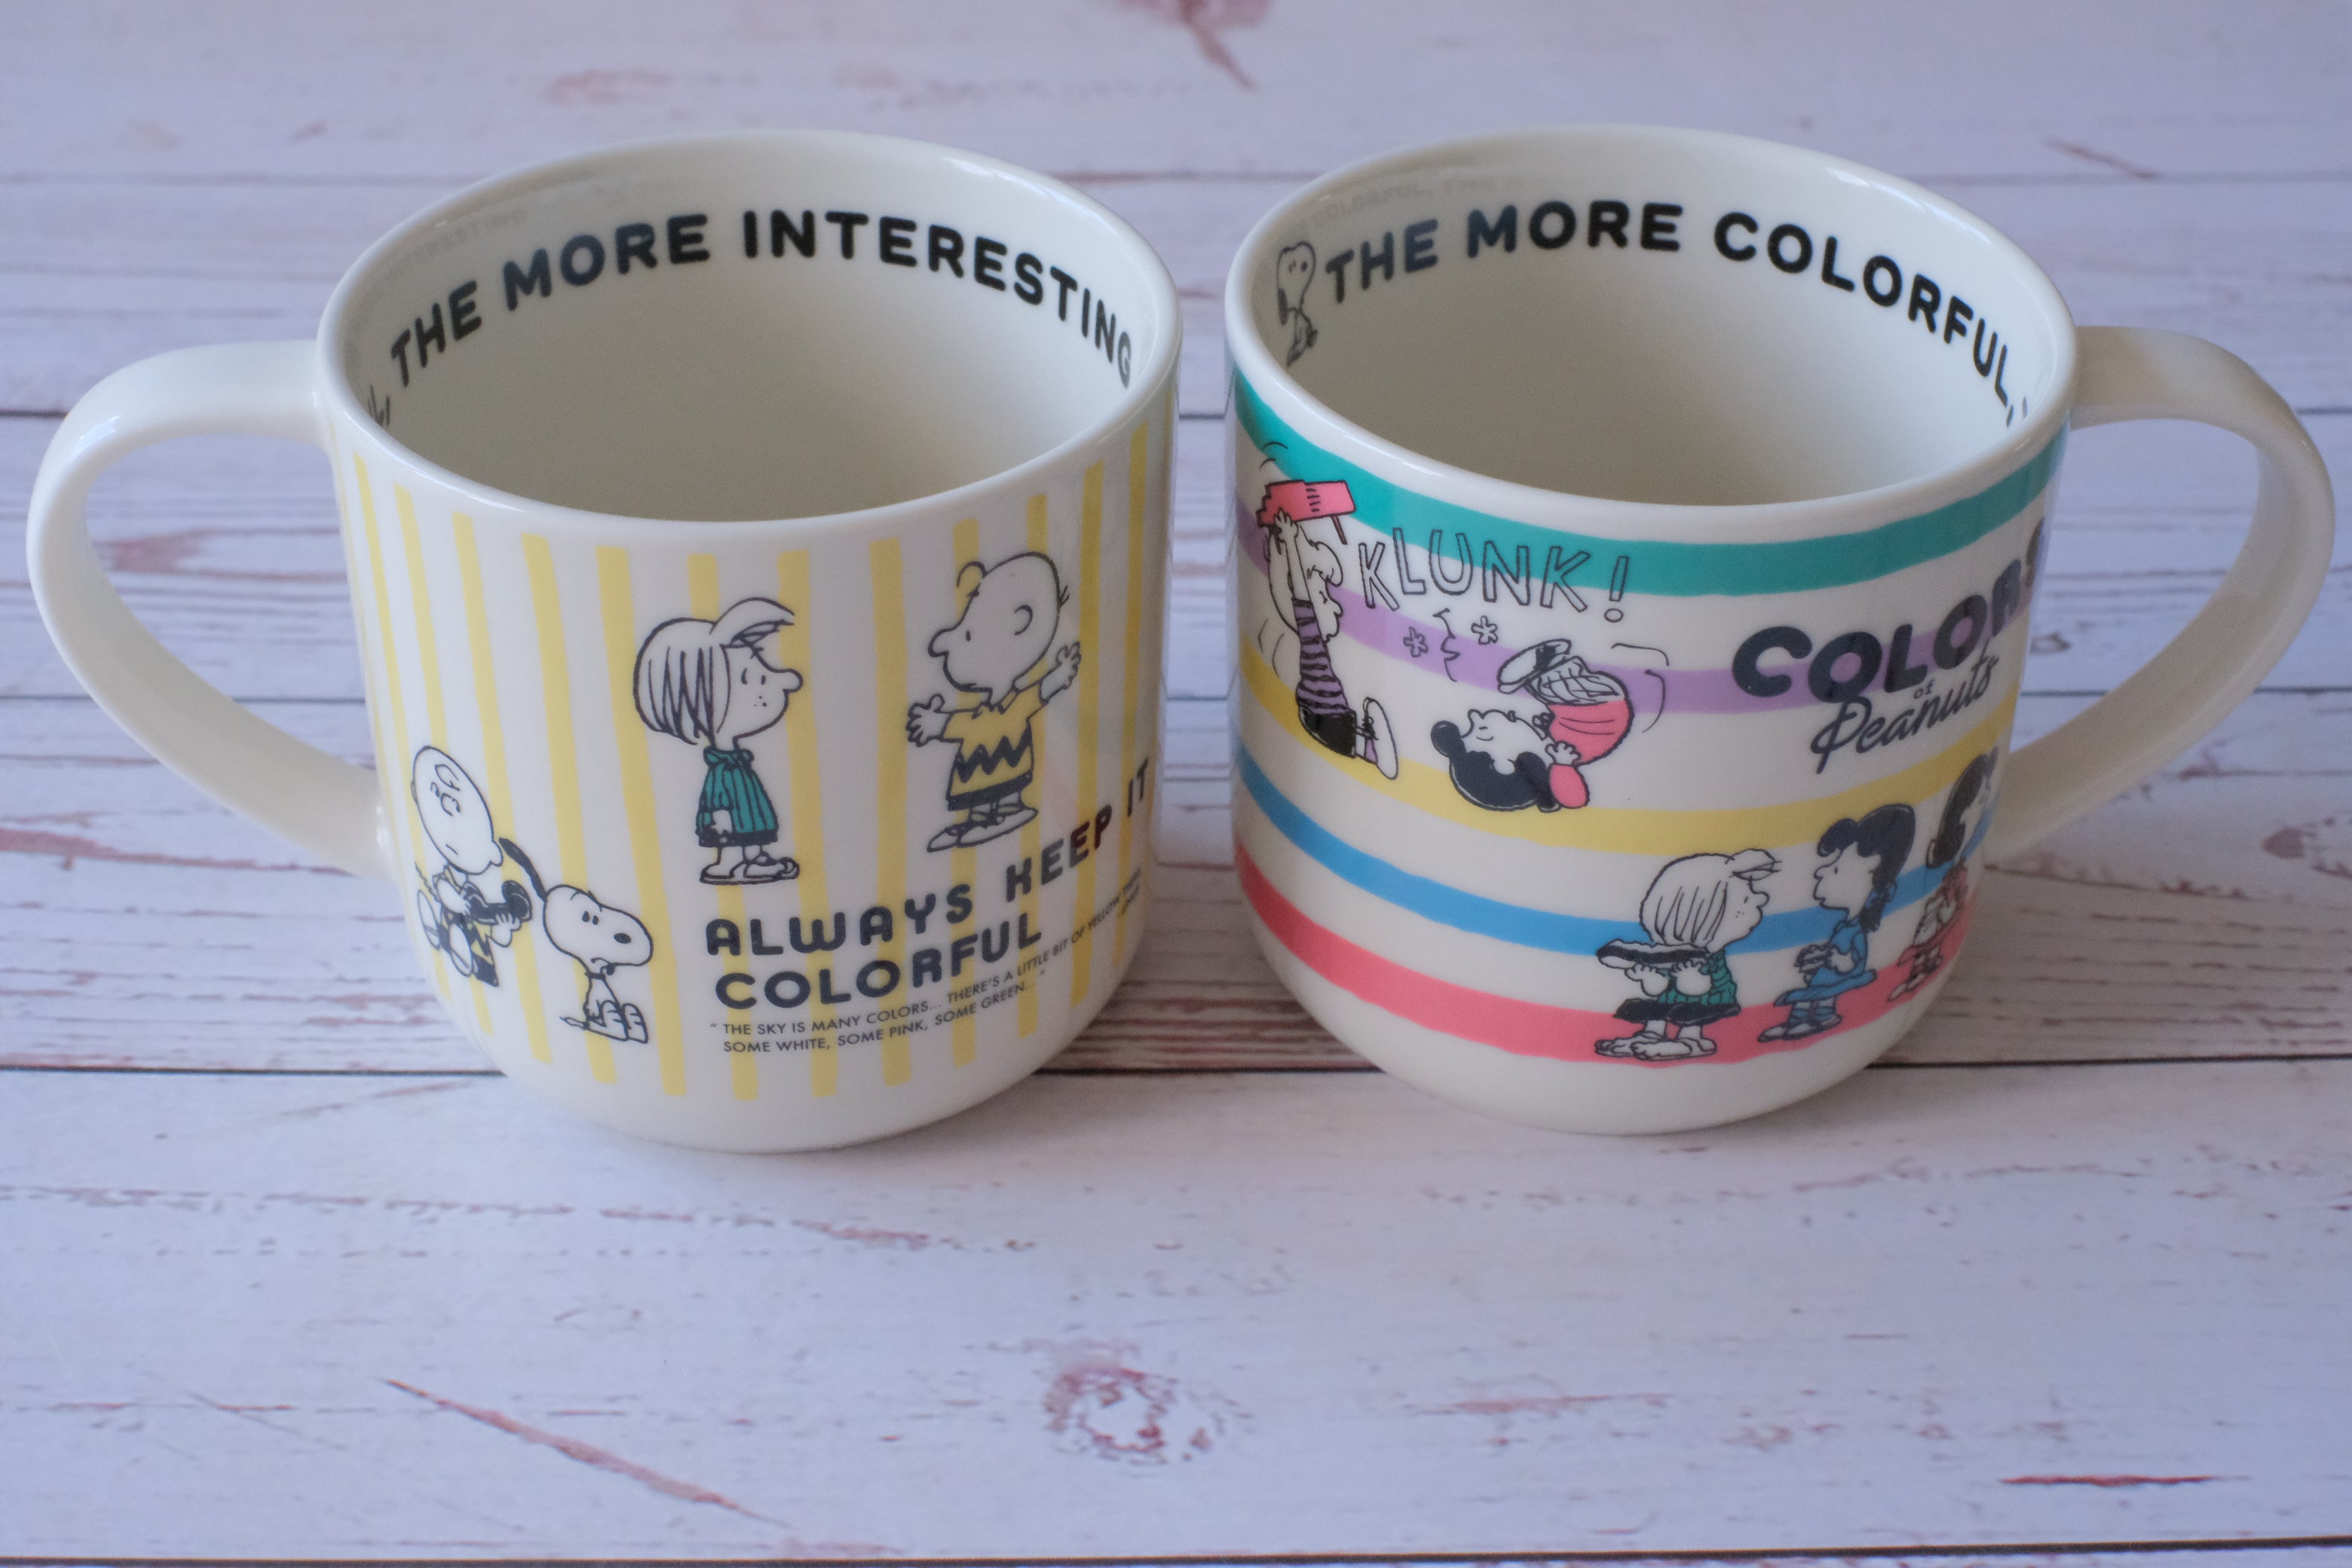 Snoopy Tumblers, Snoopy Mugs, Snoopy And Woodstock, Woodstock